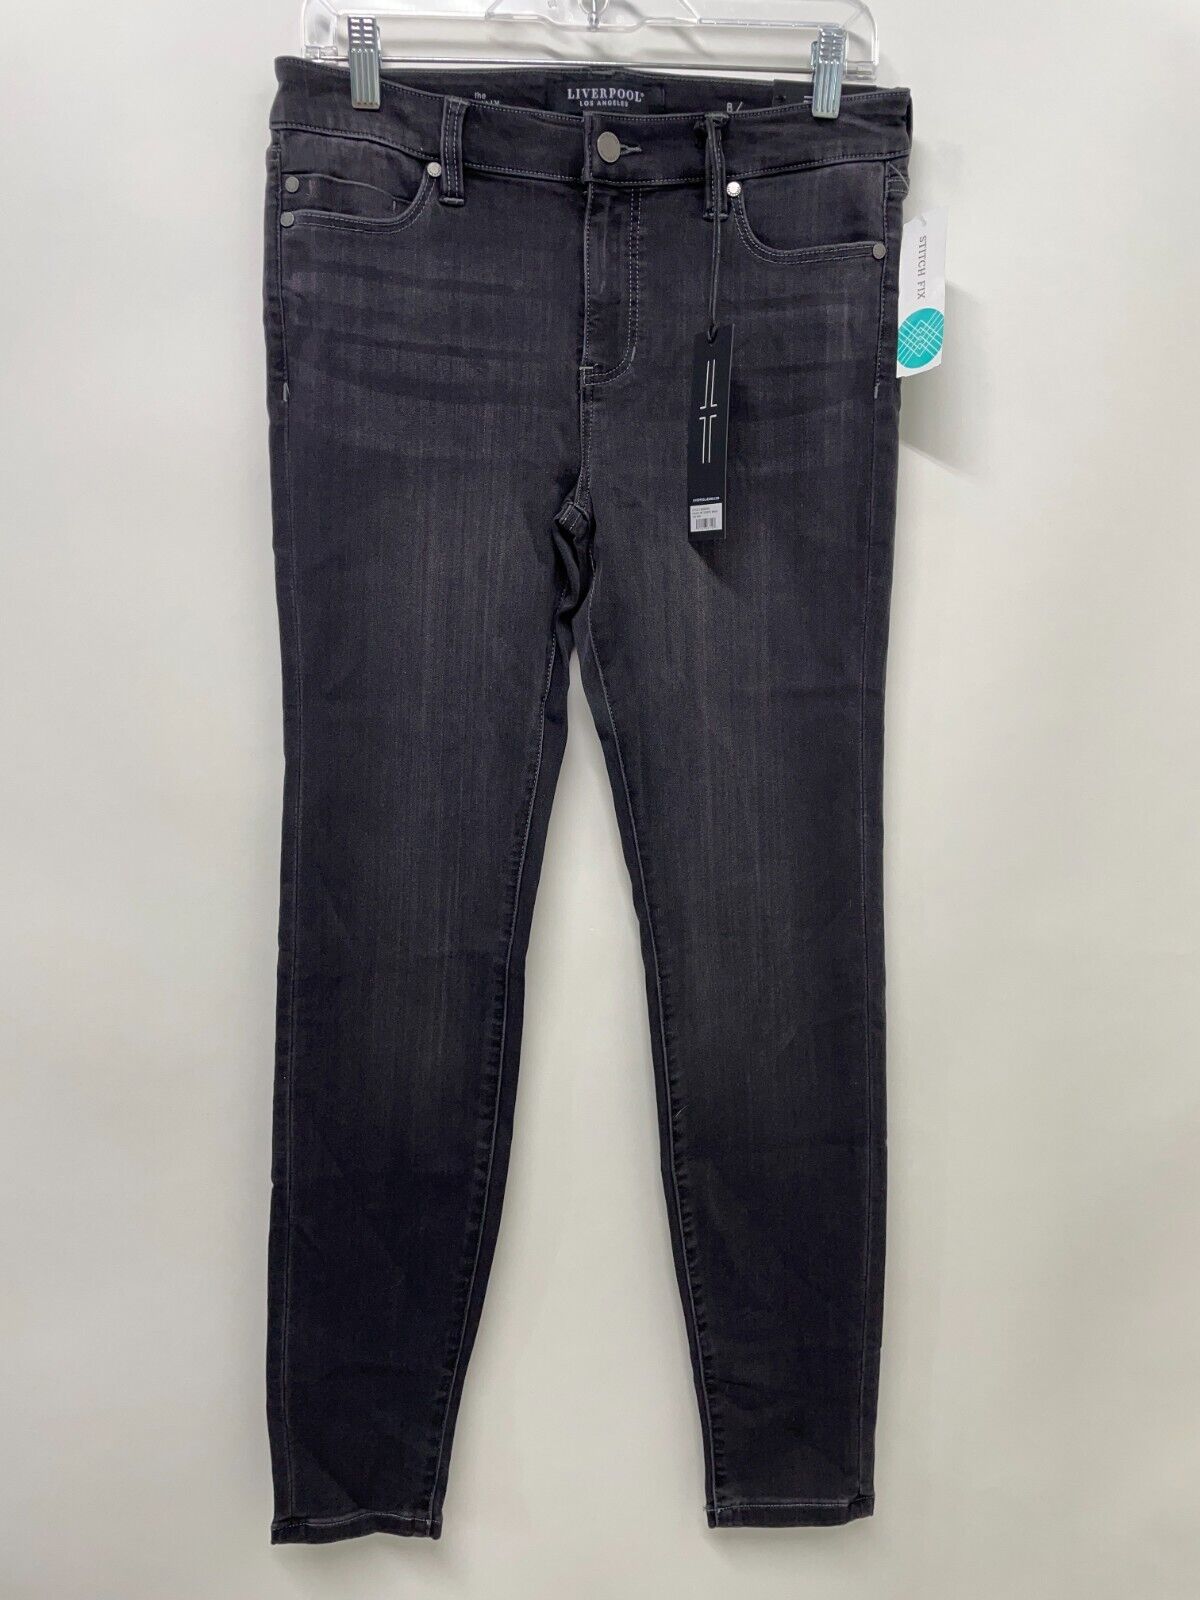 Liverpool Jeans Women's 8/29 Abby Skinny Silky Soft Meteorite Wash LM2000F62 NWT